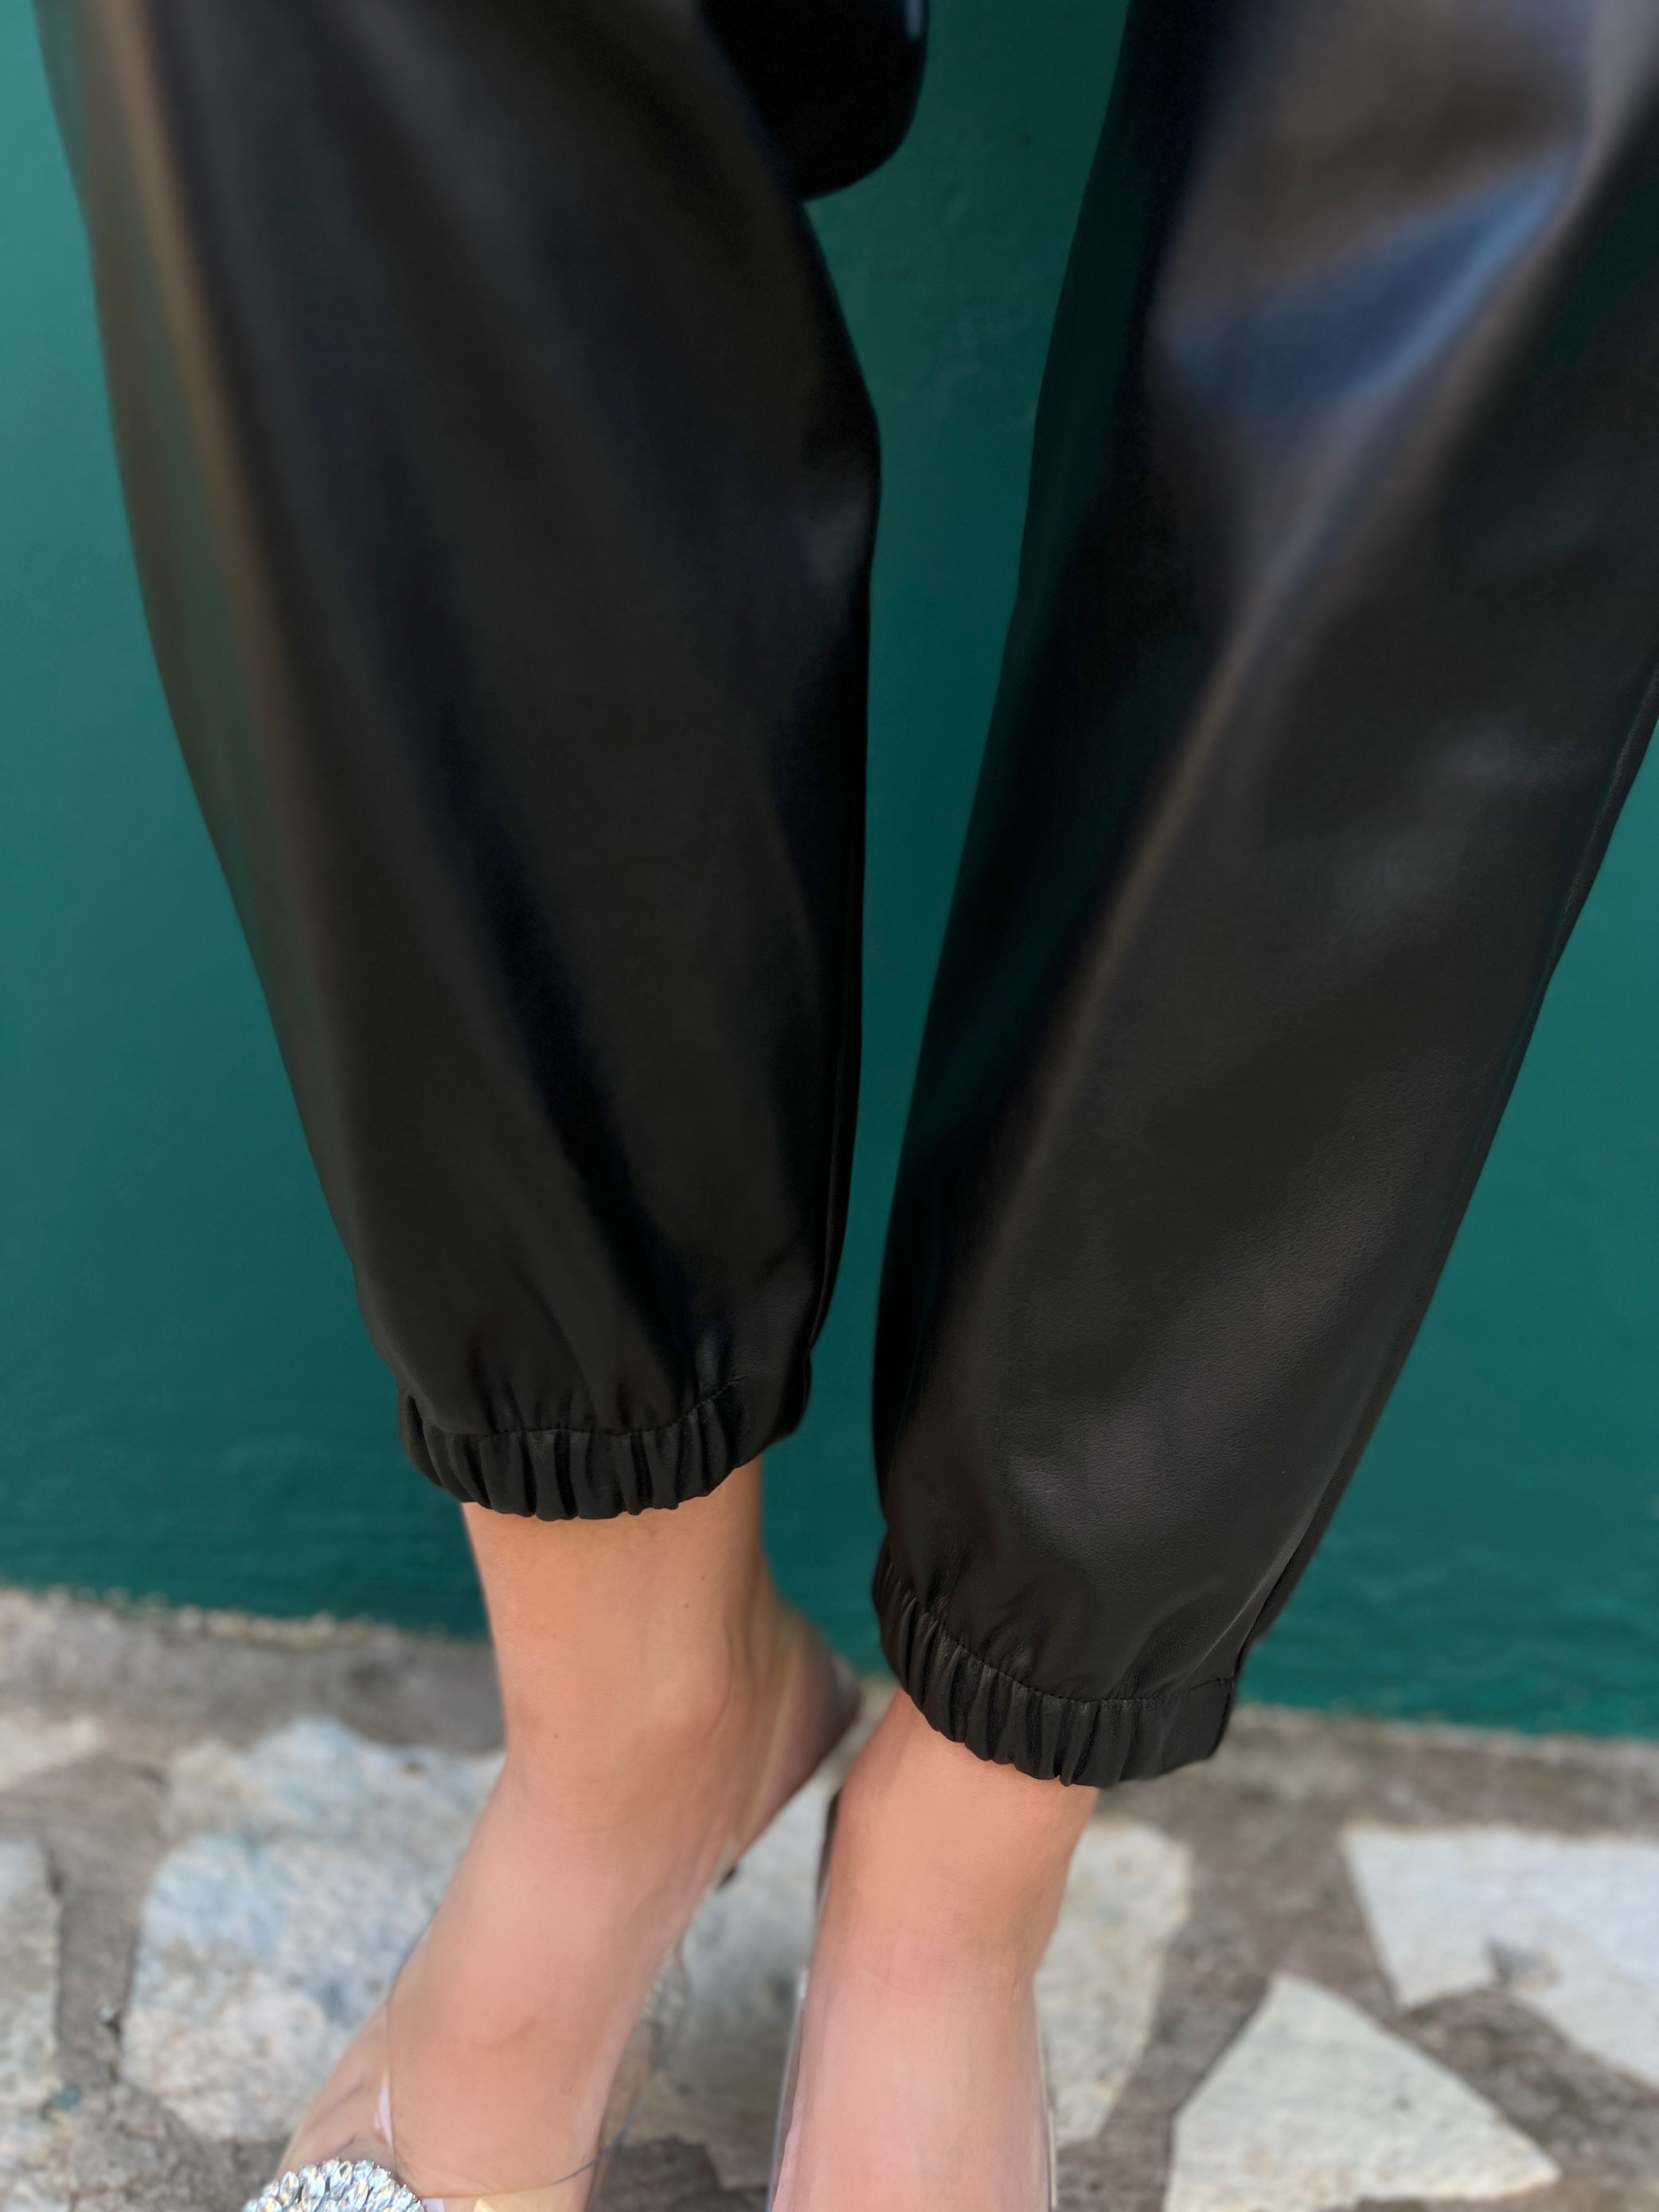 Eco Leather Trousers Black Παντελόνι Δερματίνη